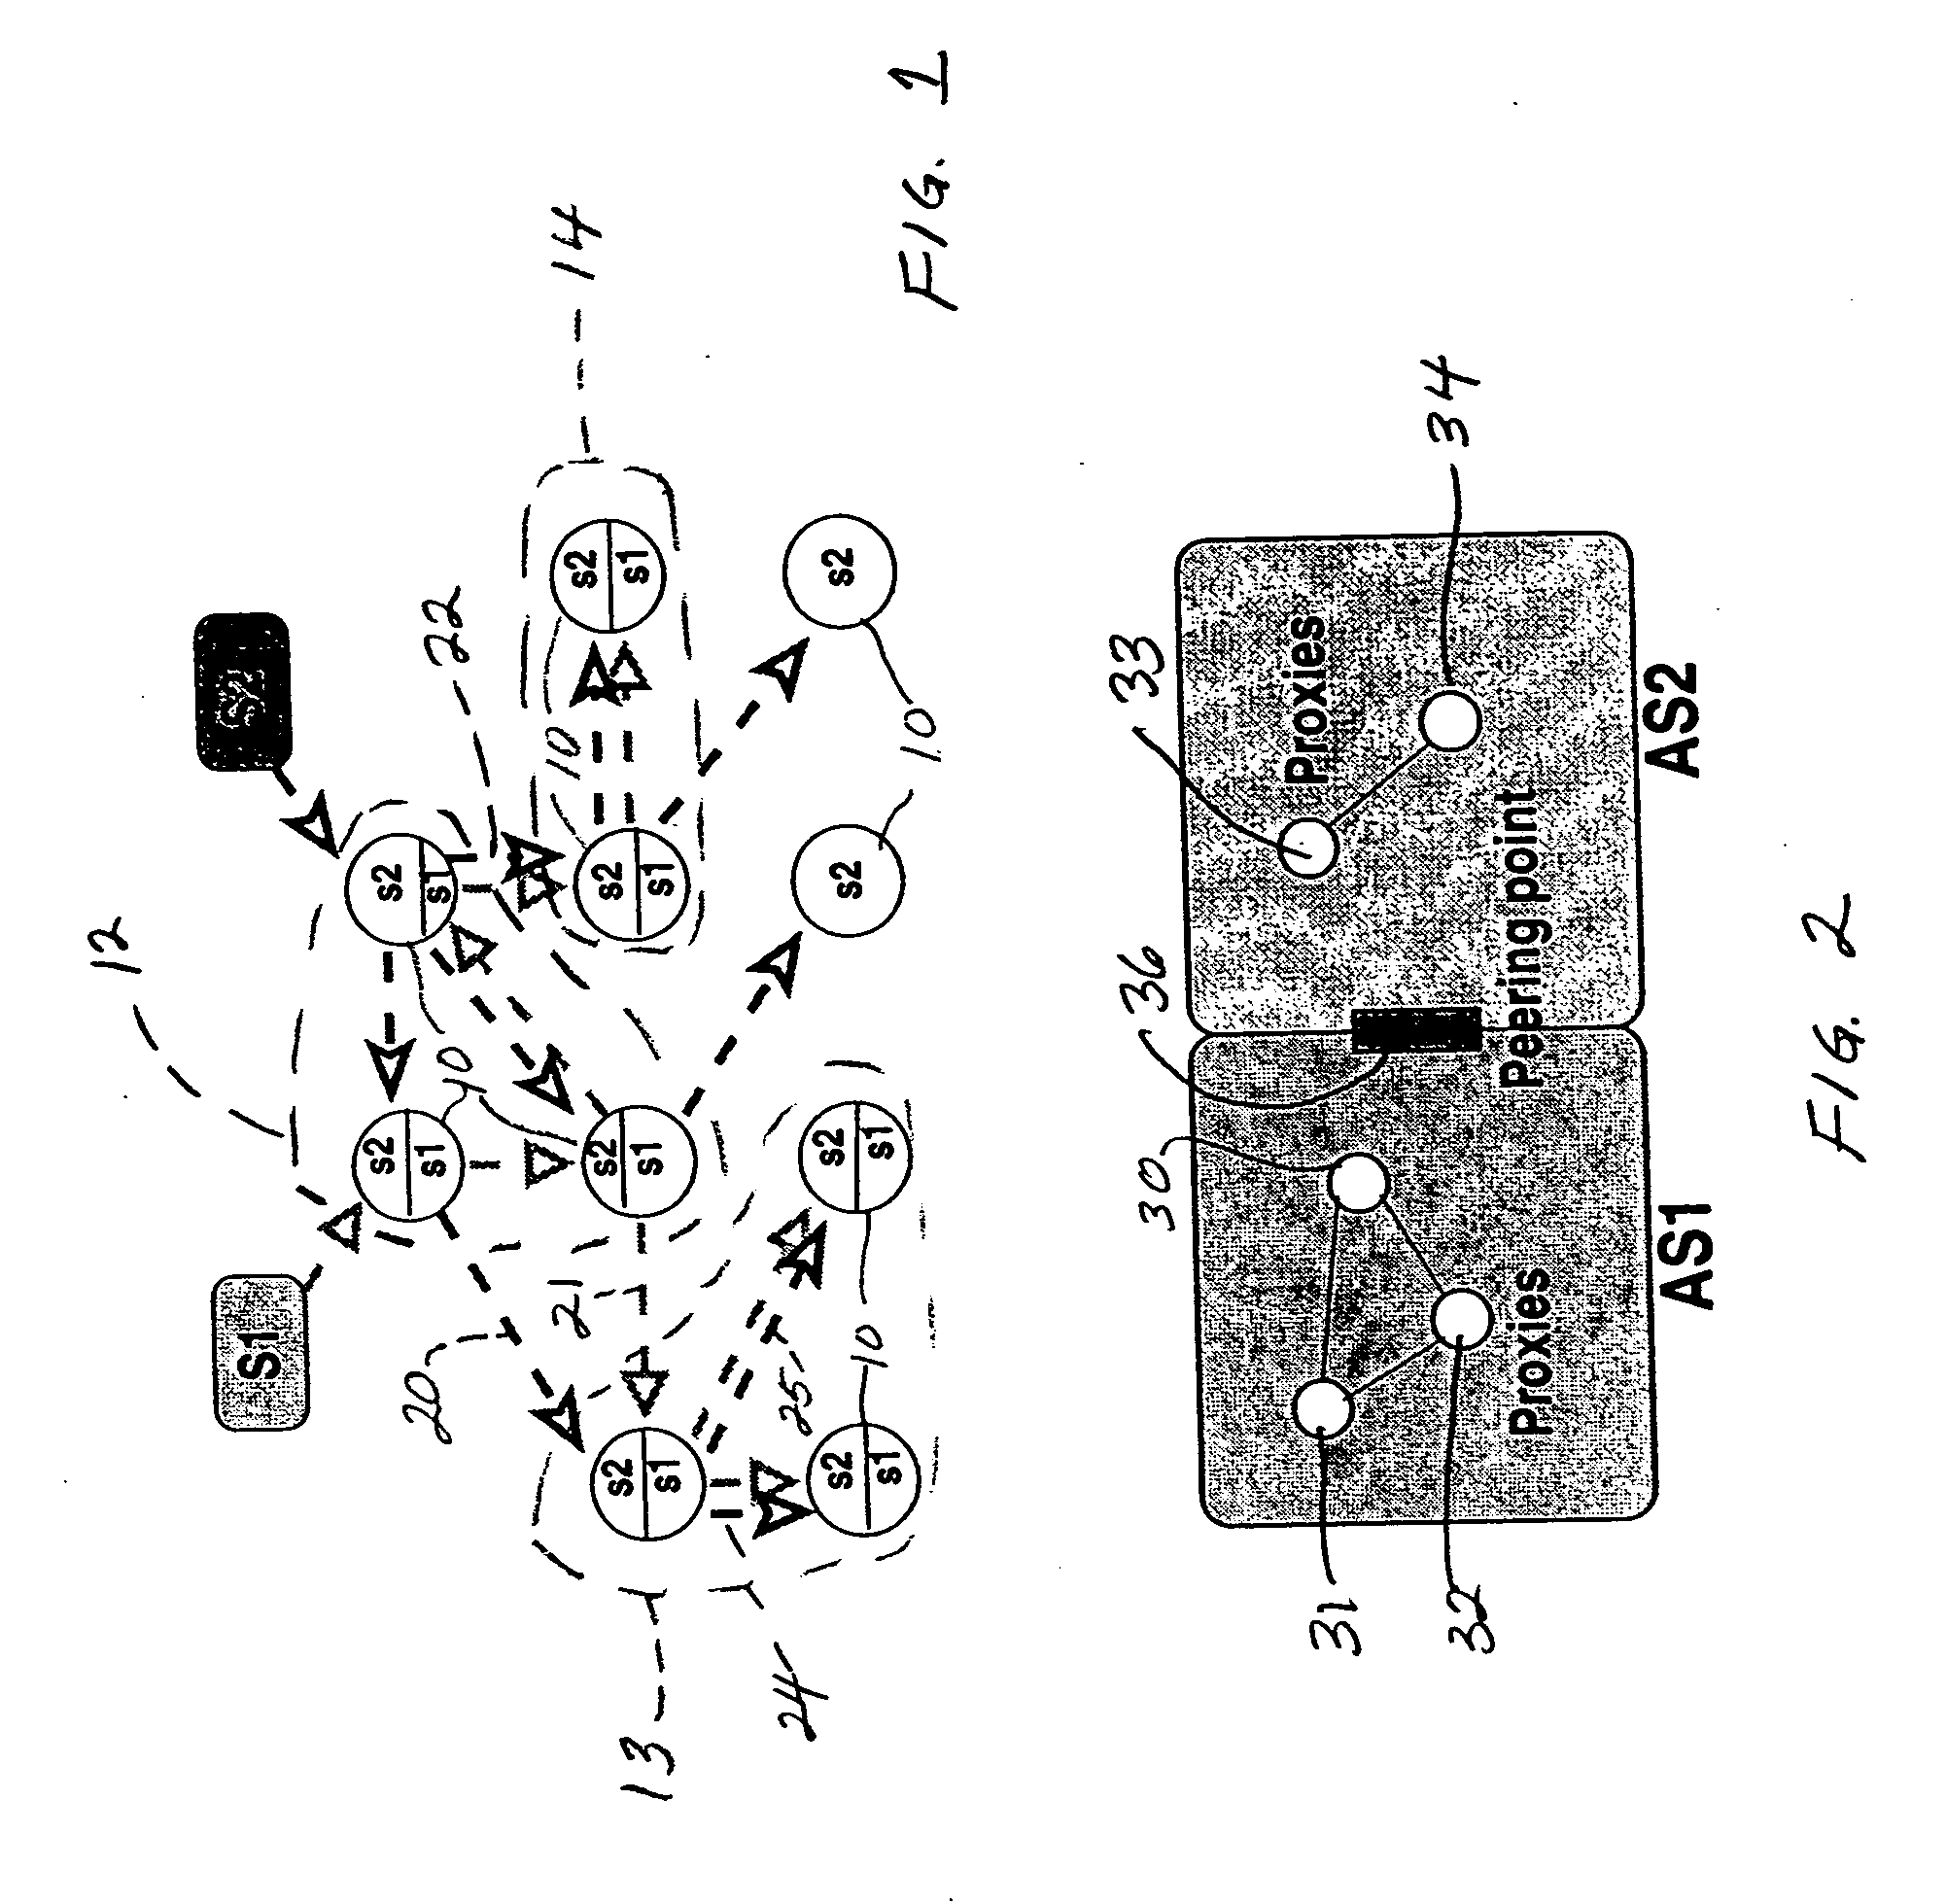 Resource-aware adaptive multicasting in a shared proxy overlay network